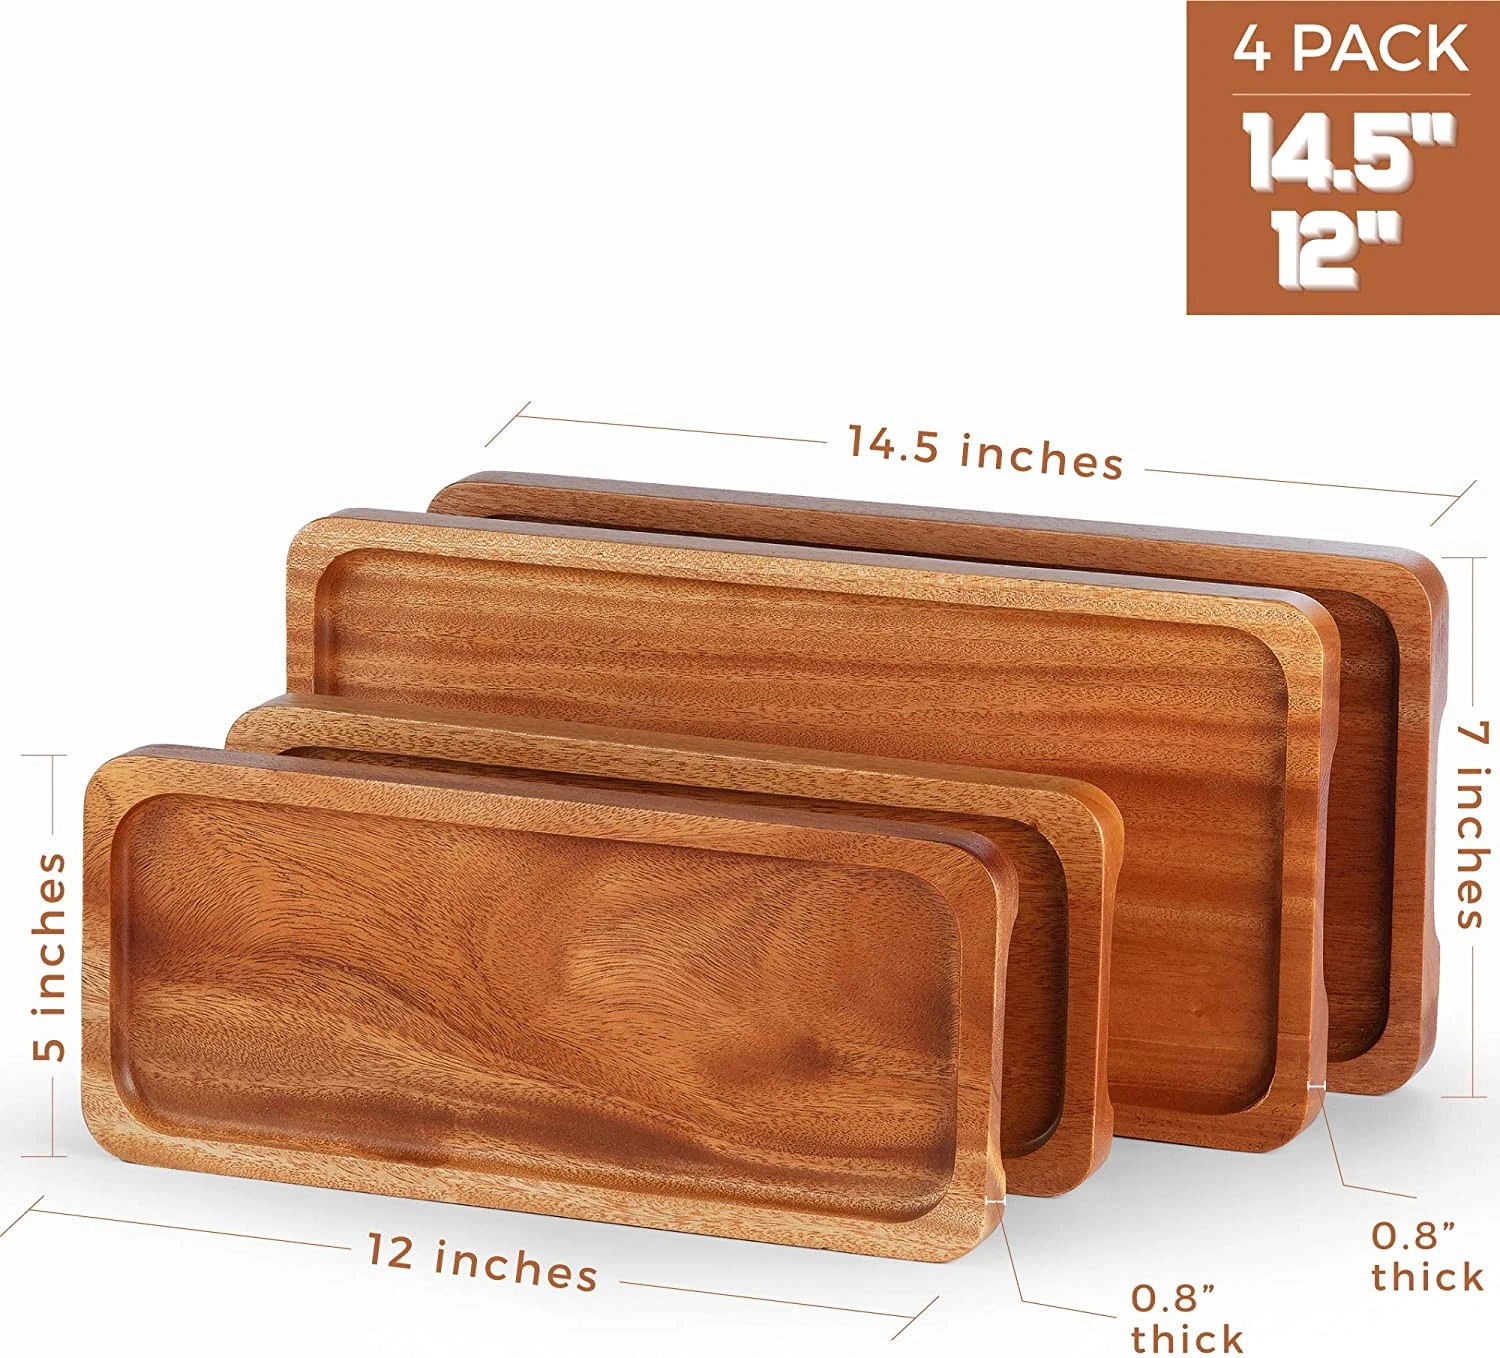 Serving Tray Platter Natural Wood (Set of 4) For Food Holder BBQ Party Buffet Avoid Sliding Spilling Food Easy Carry Grooved